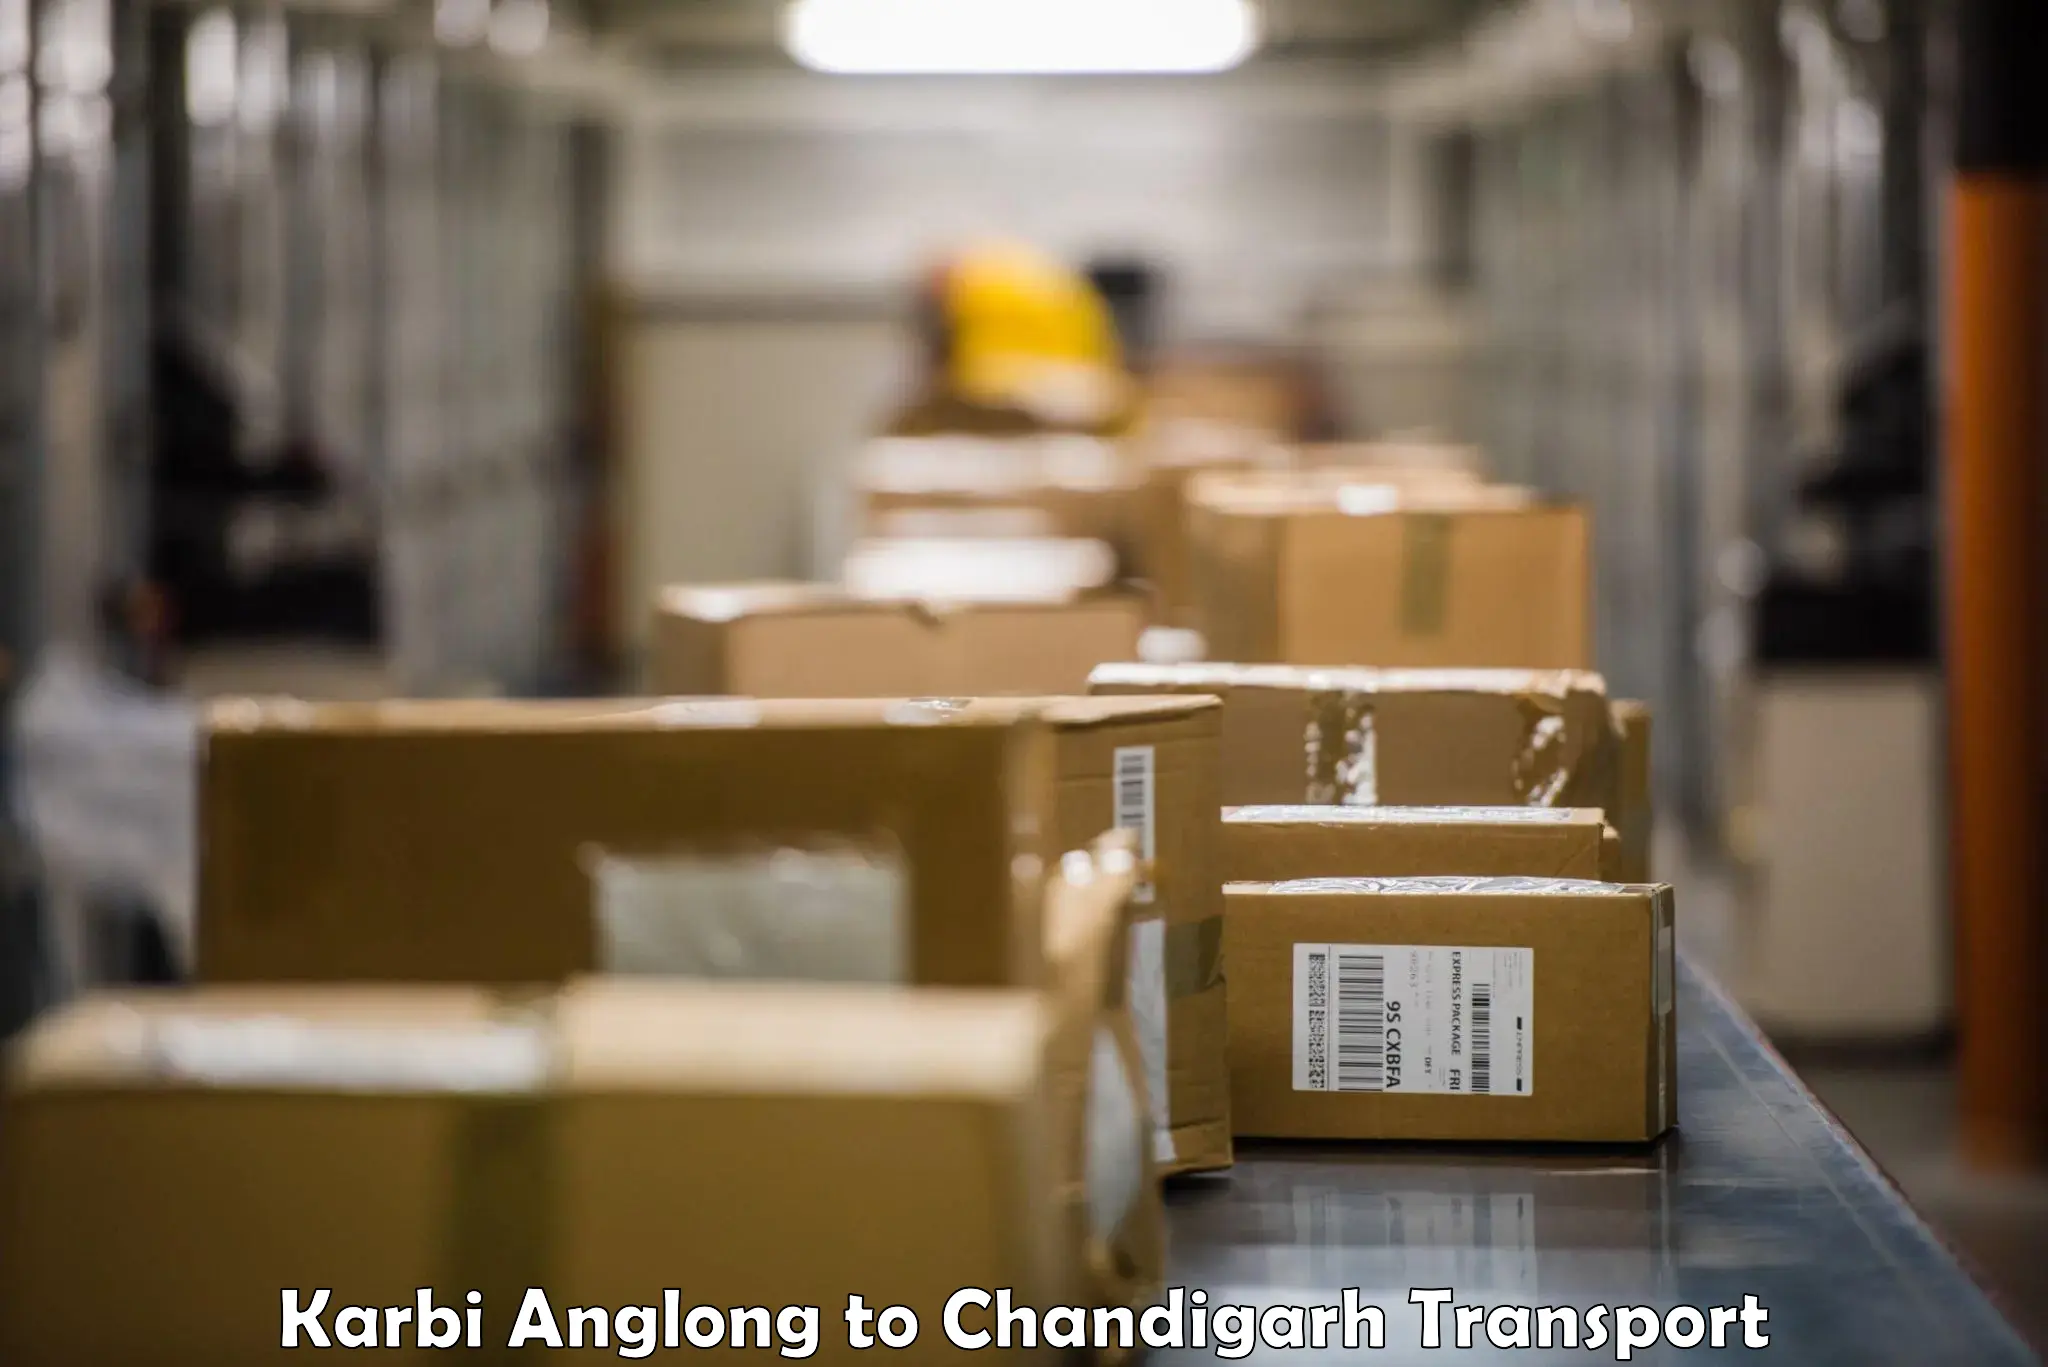 Delivery service Karbi Anglong to Chandigarh